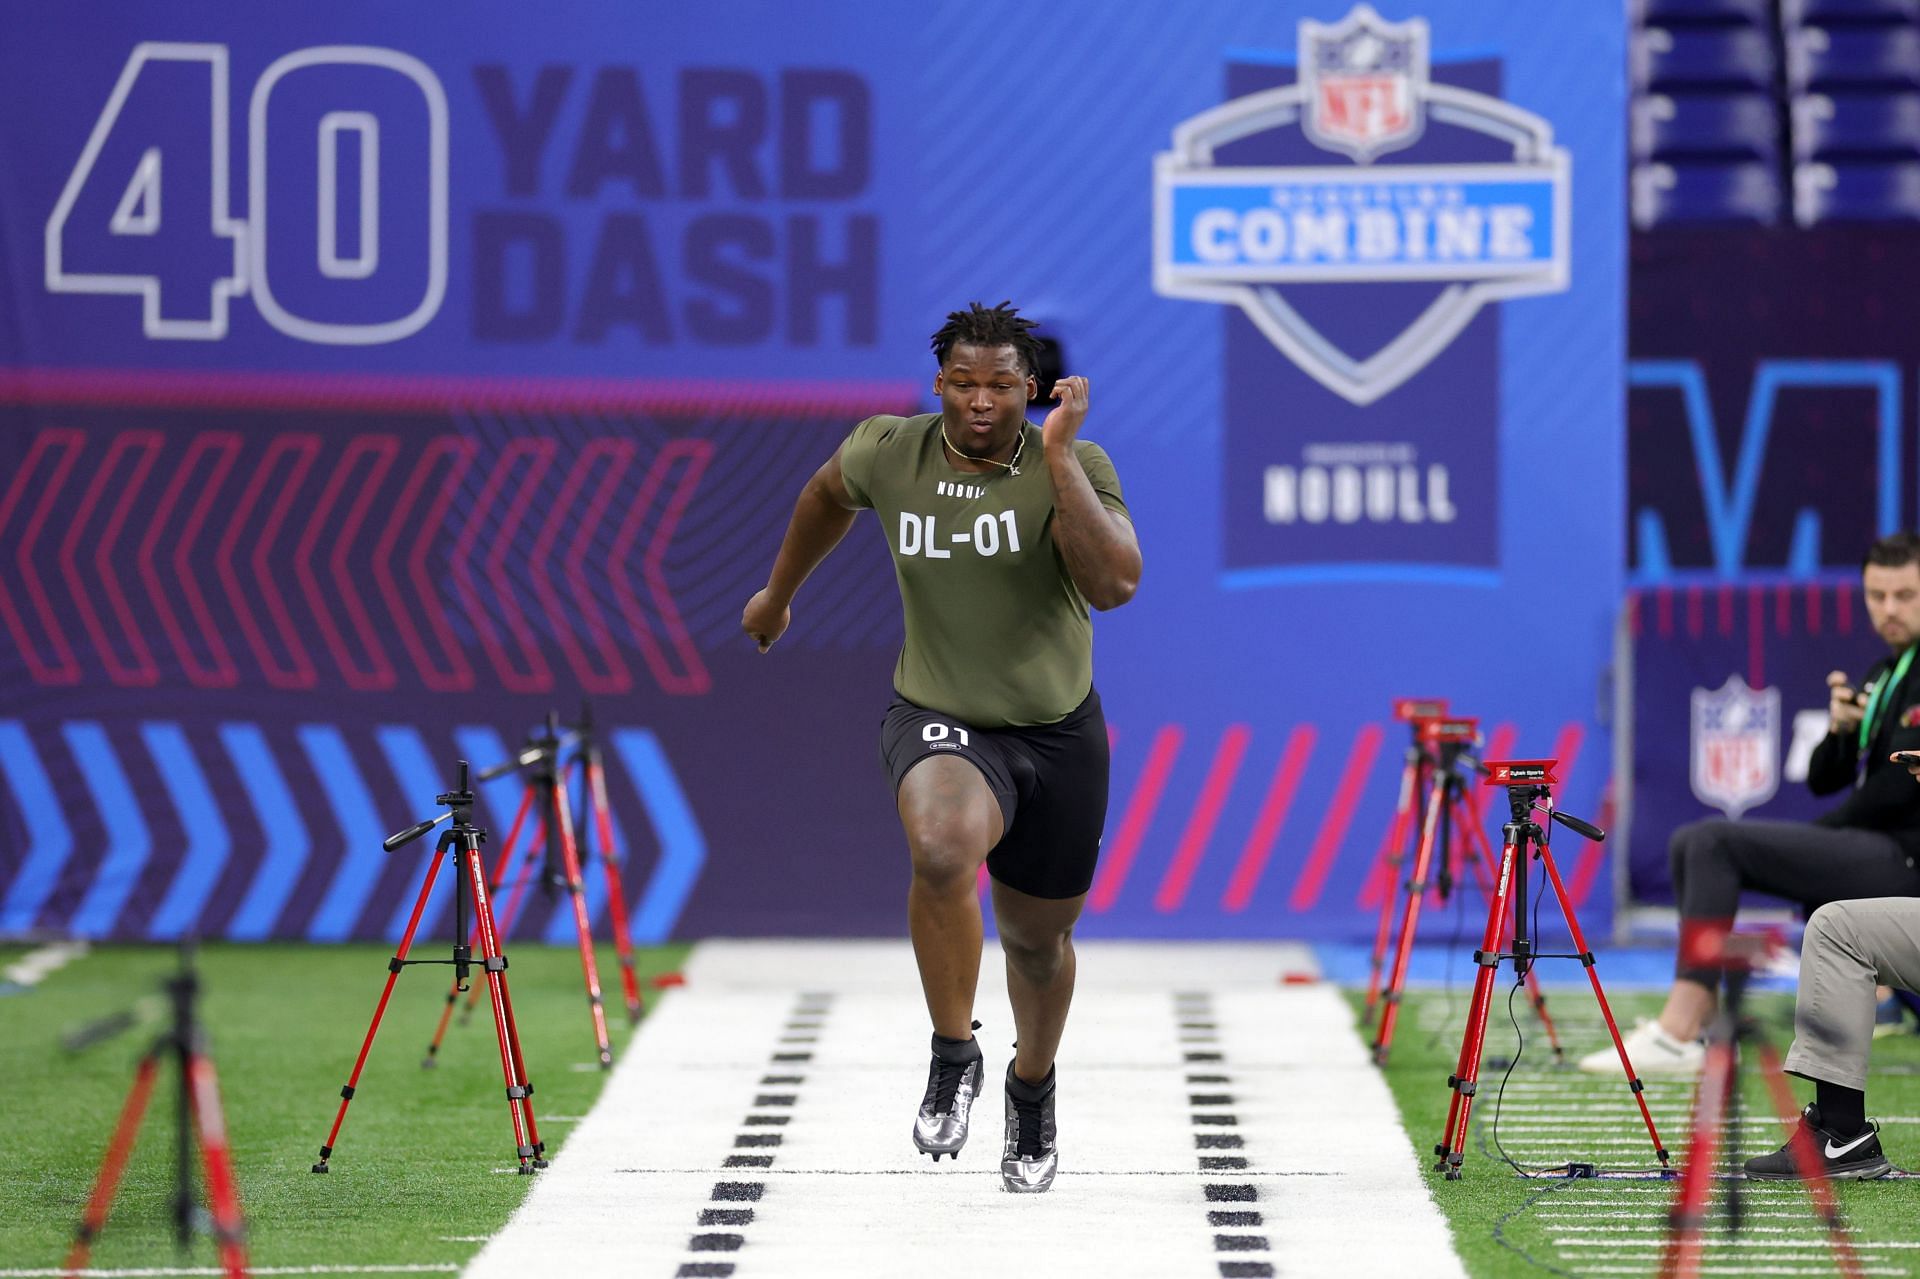 Keeanu Benton of Wisconsin participates in the 40-yard dash during the NFL Combine 